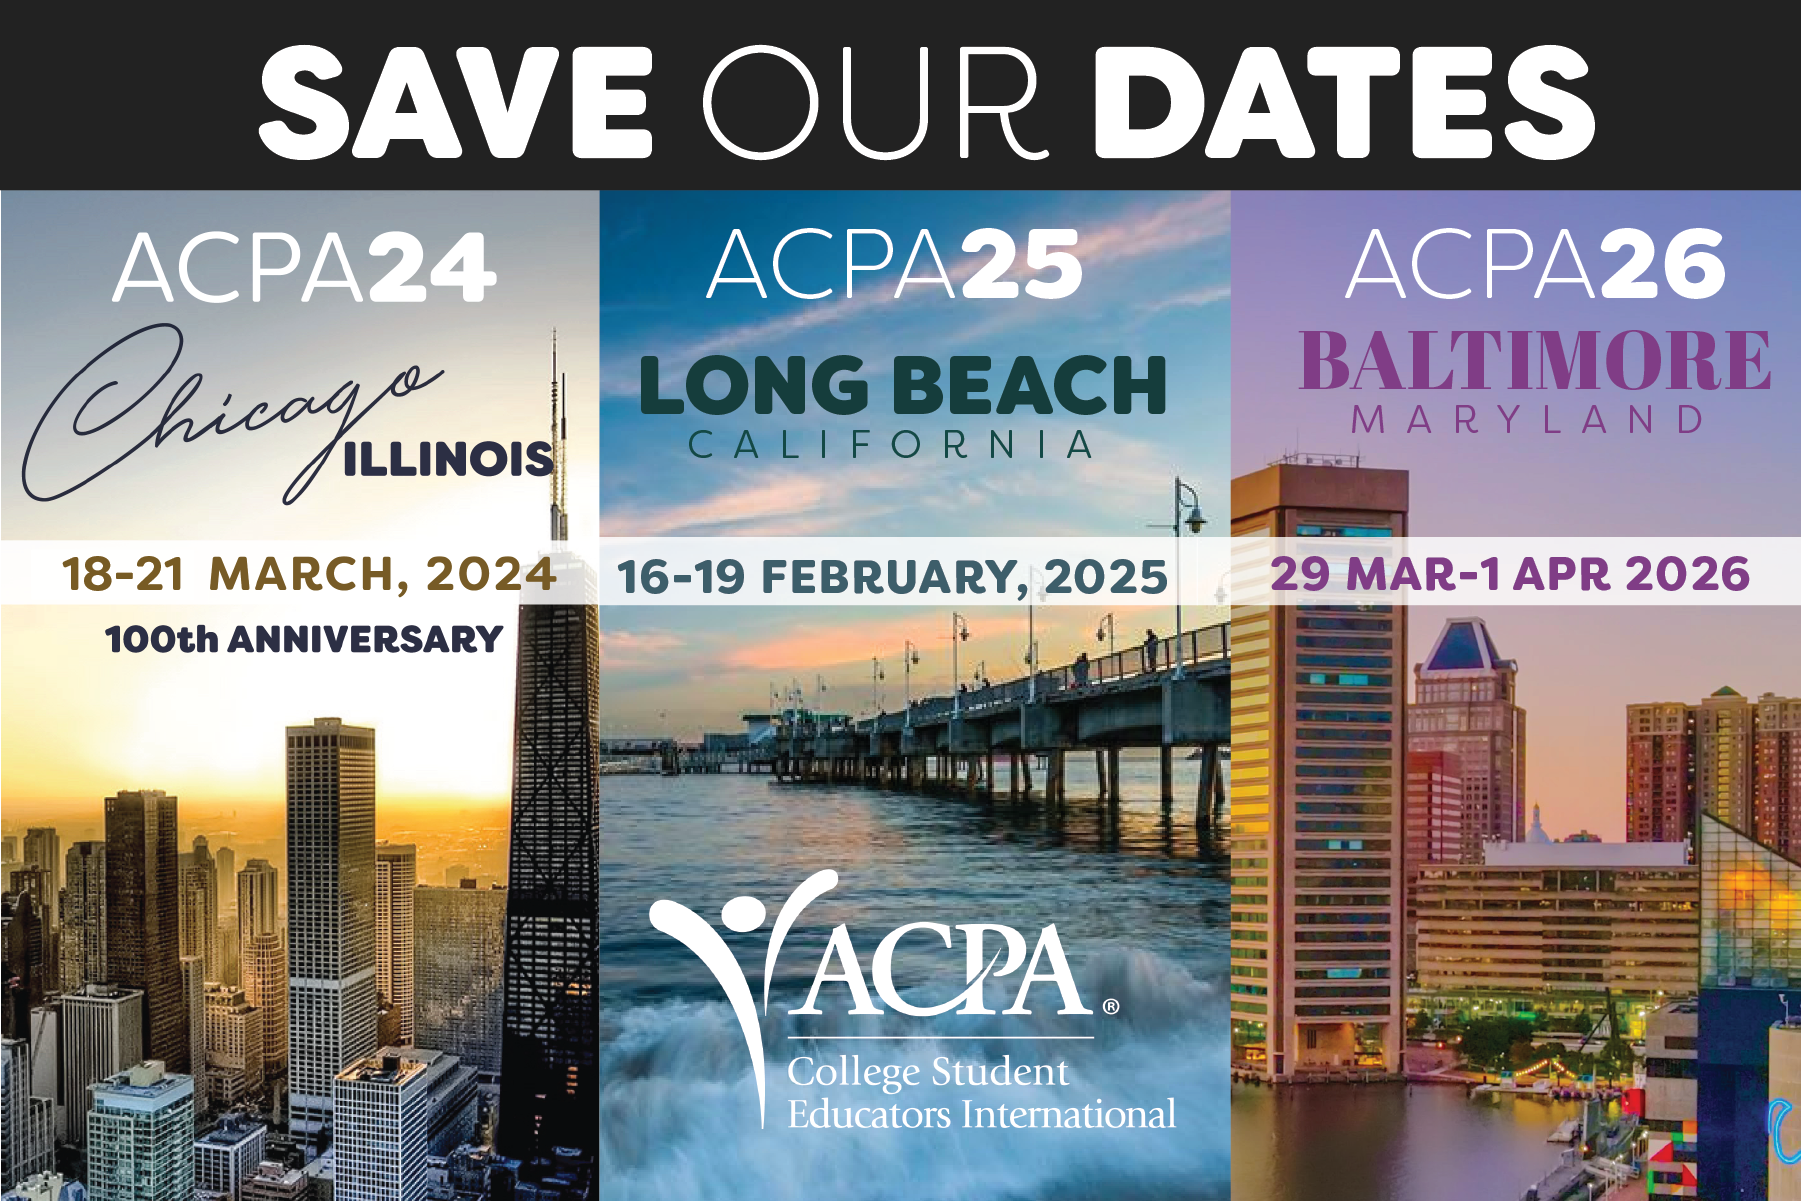 Save Our Dates. ACPA23 New Orleans, ACPA24 Chicago 18-21 March 2021 100th Anniversary, ACPA25 Long Beach Balifornia 16-19 February 2025